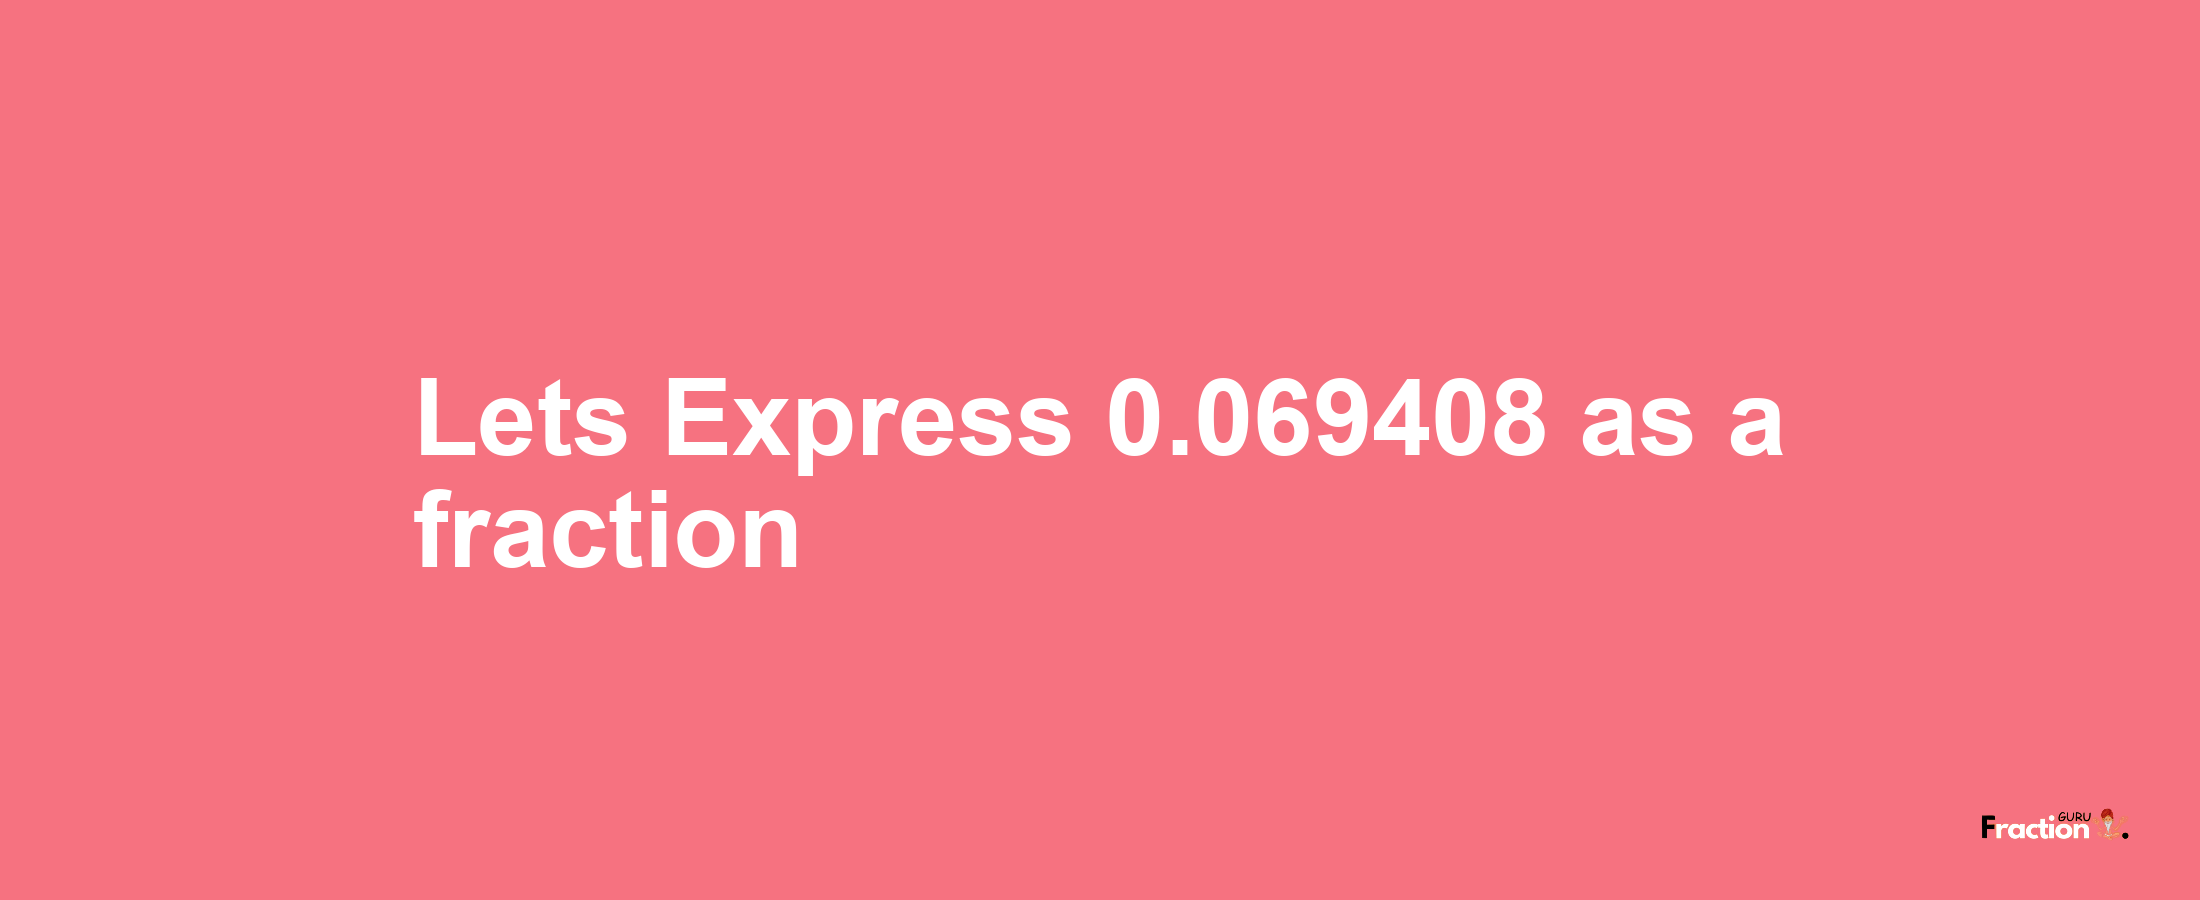 Lets Express 0.069408 as afraction